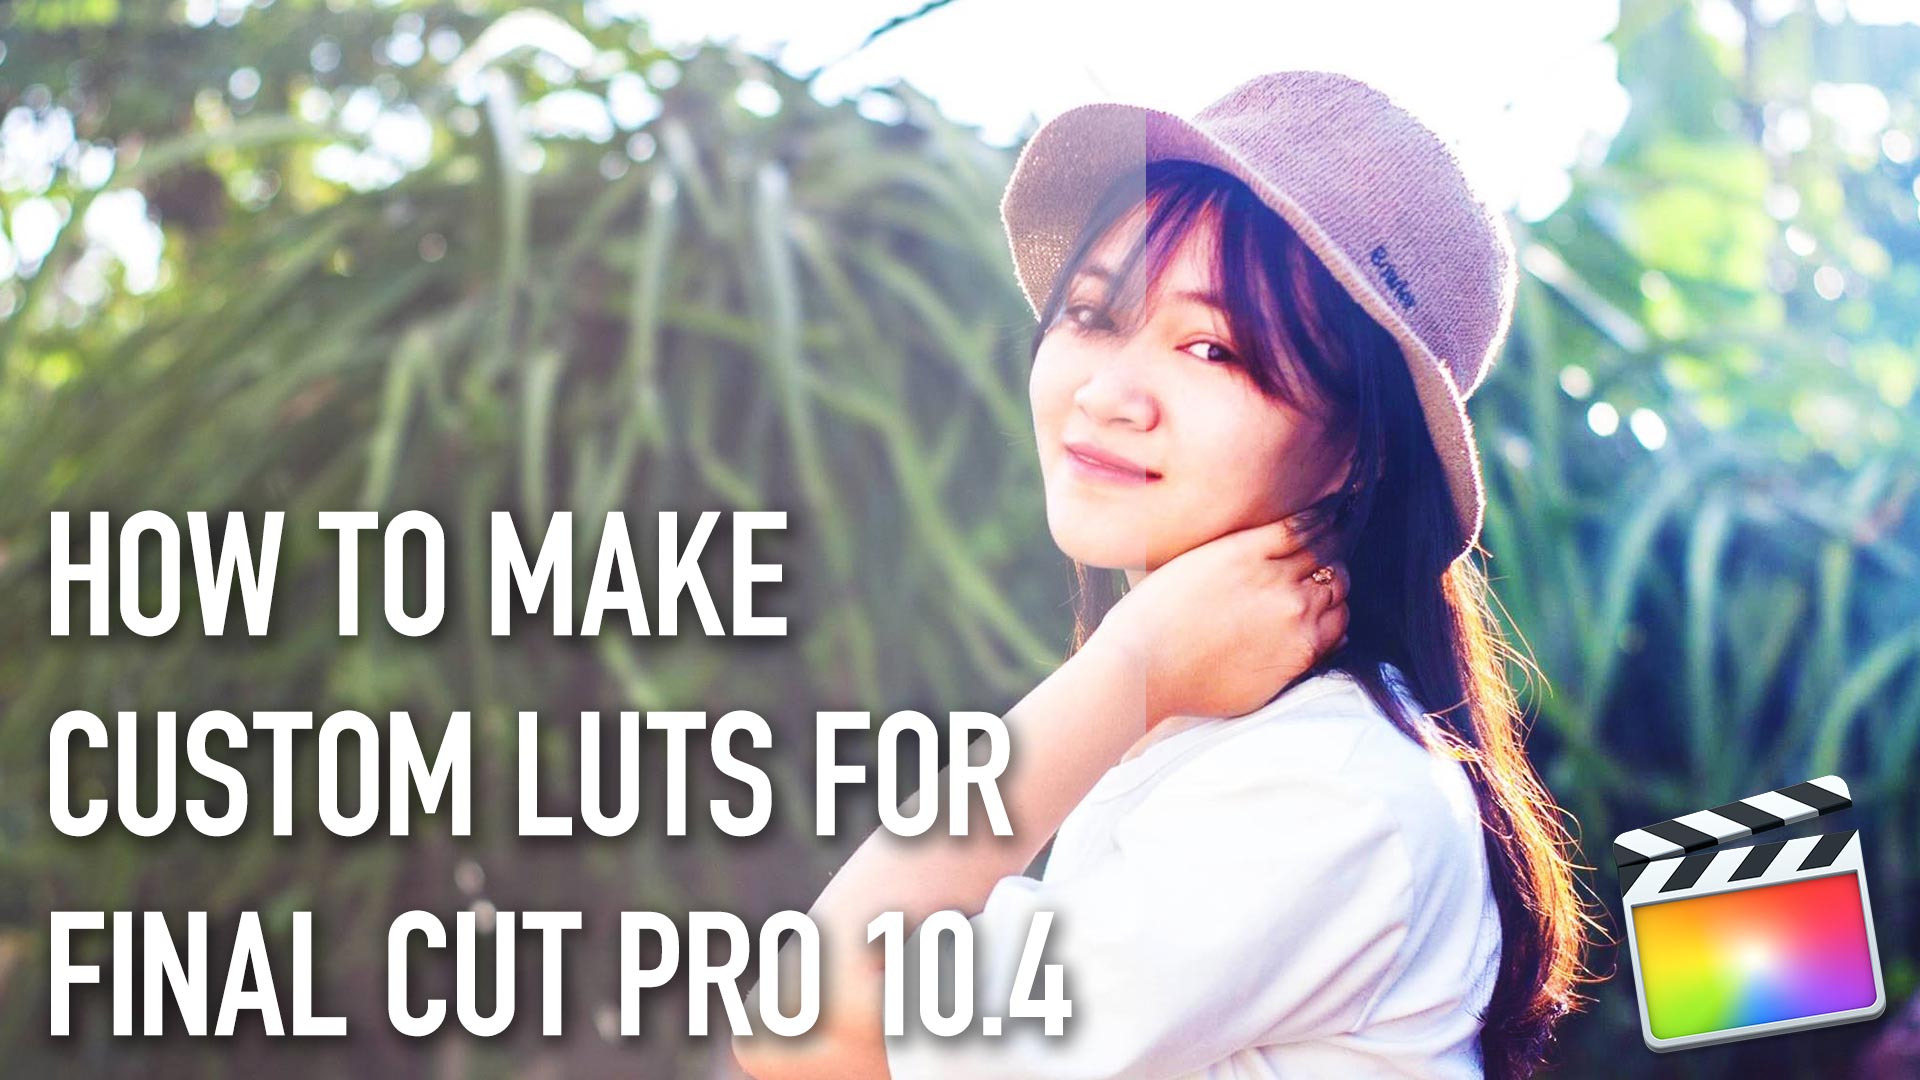 How to Make Custom LUTS For Final Cut Pro X 10.4